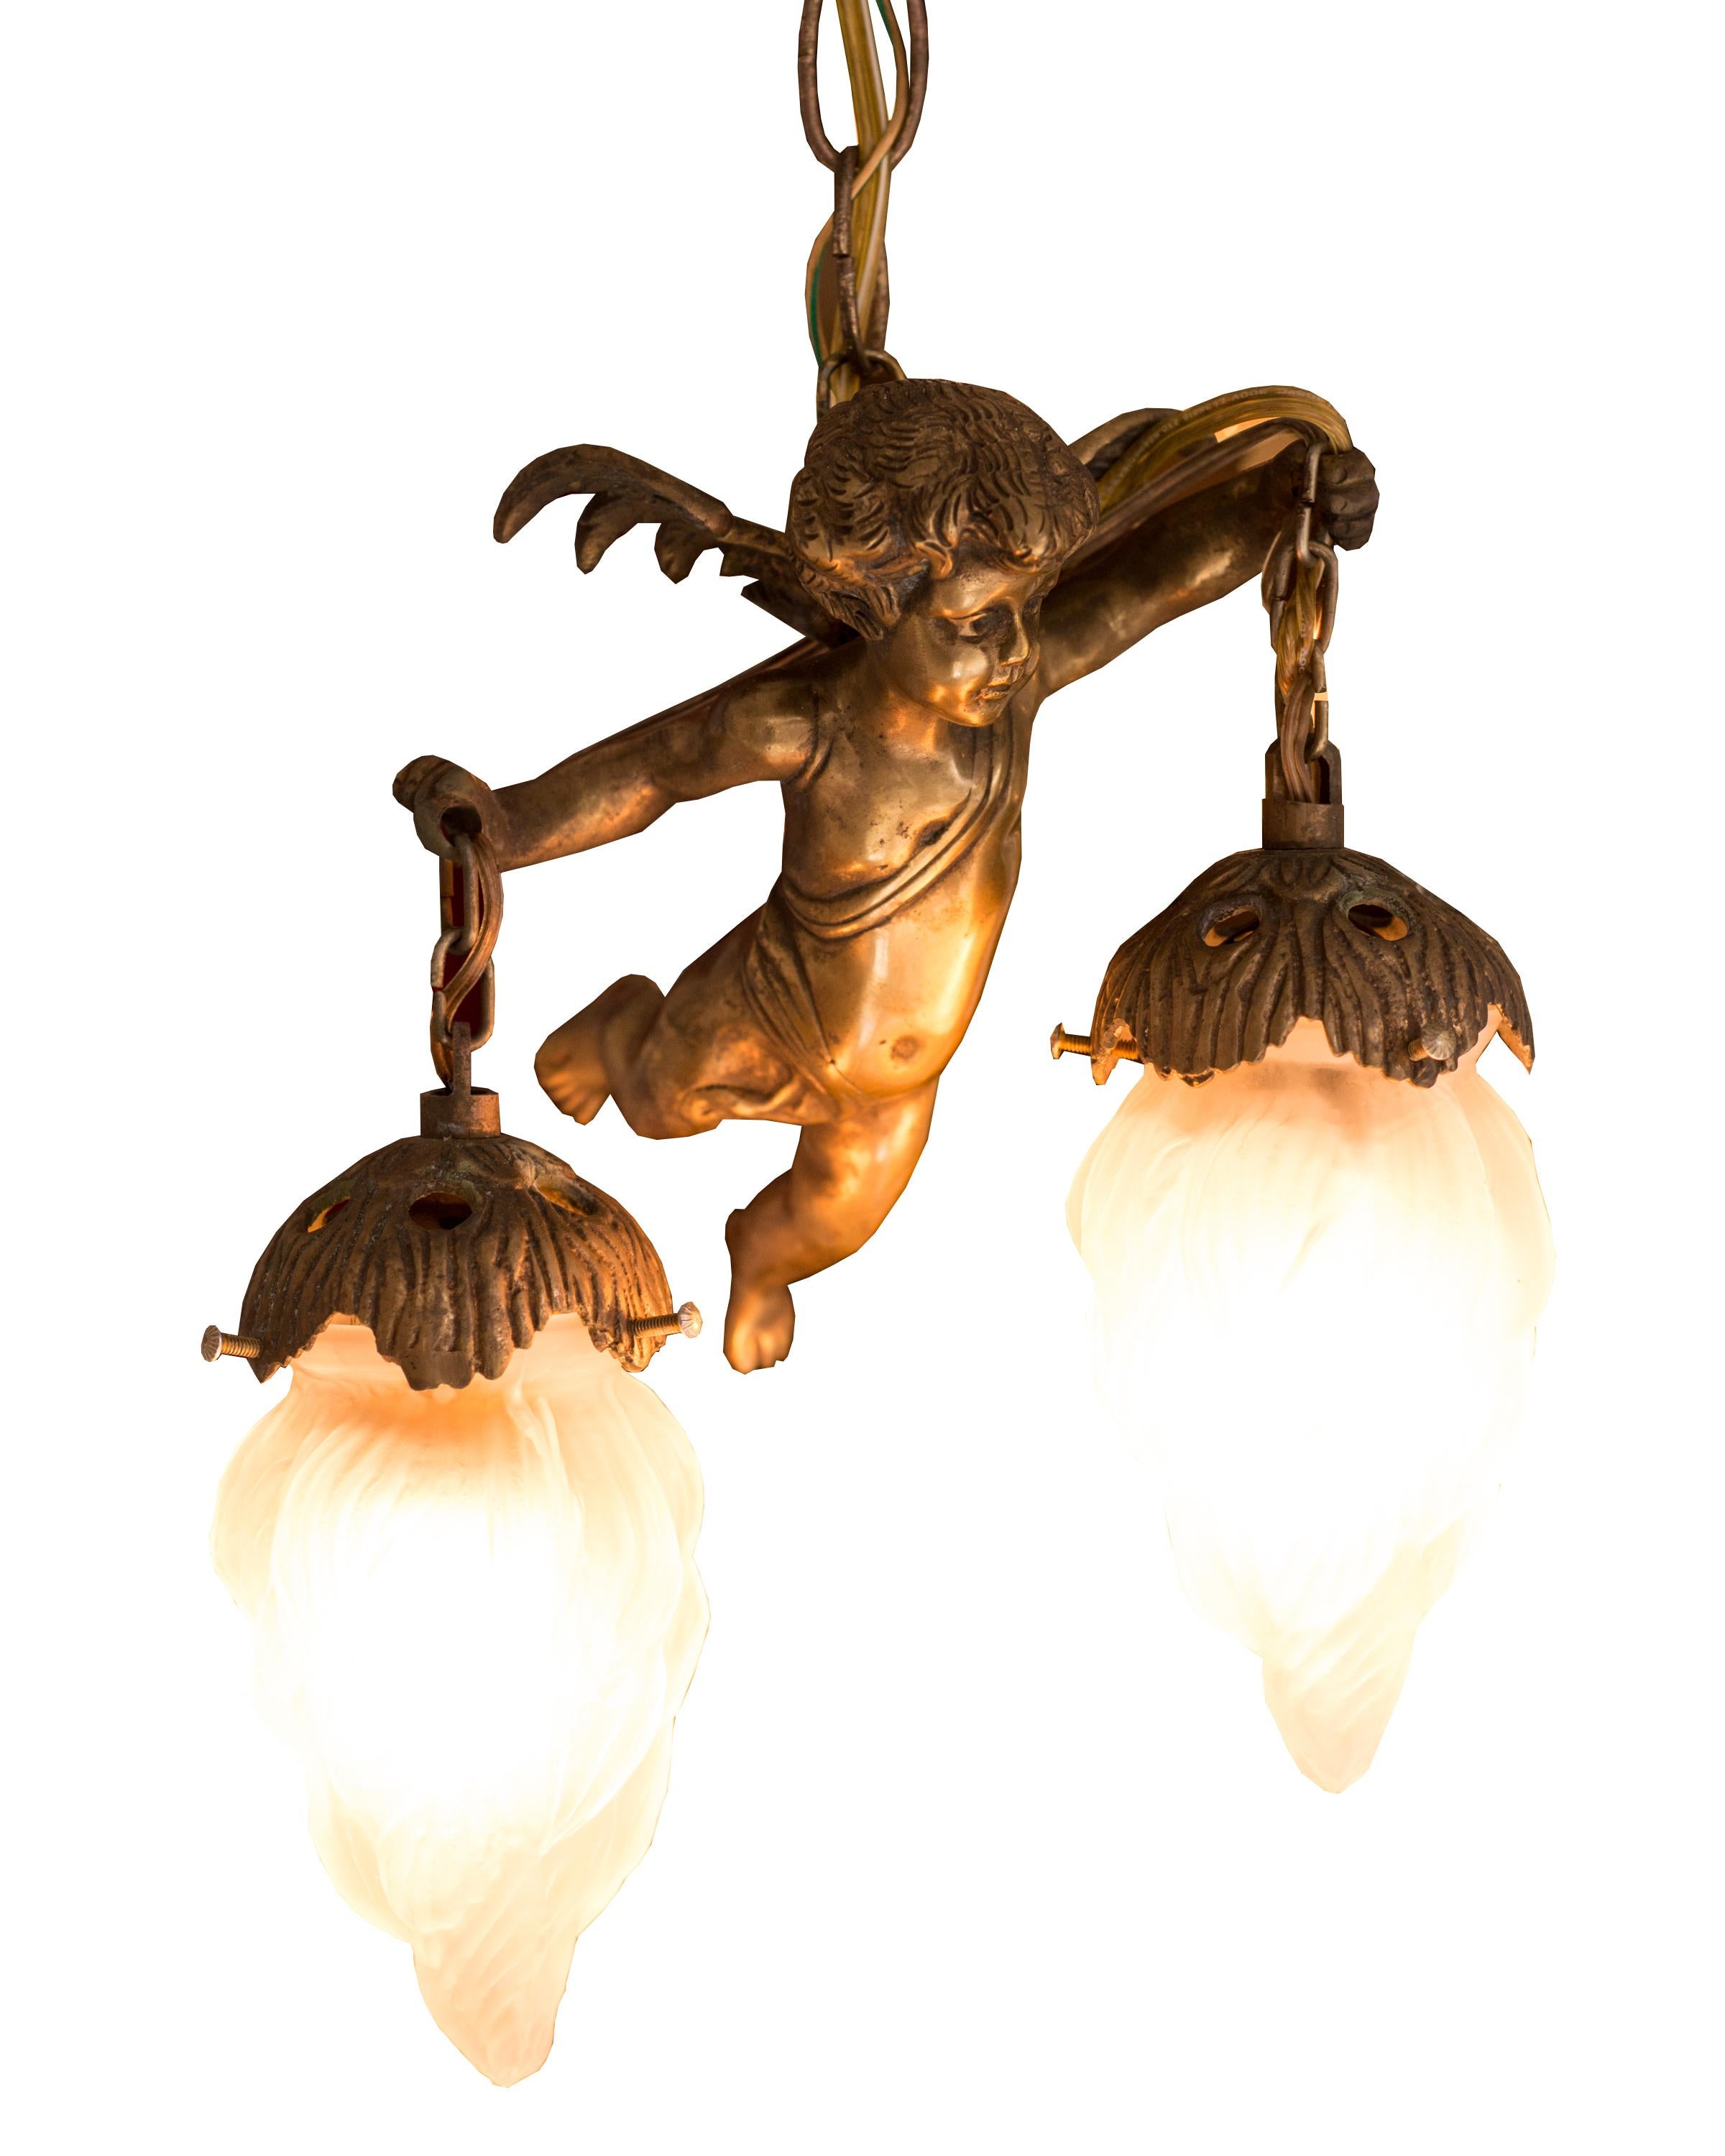 These whimsical antique bronze cherub pendants are truly divine. Each solid bronze cherub holds a frosted flame shaped bulb covers from each arm and is suspended from the ceiling by 3 feet of matching chain. We envision these pendants hanging over